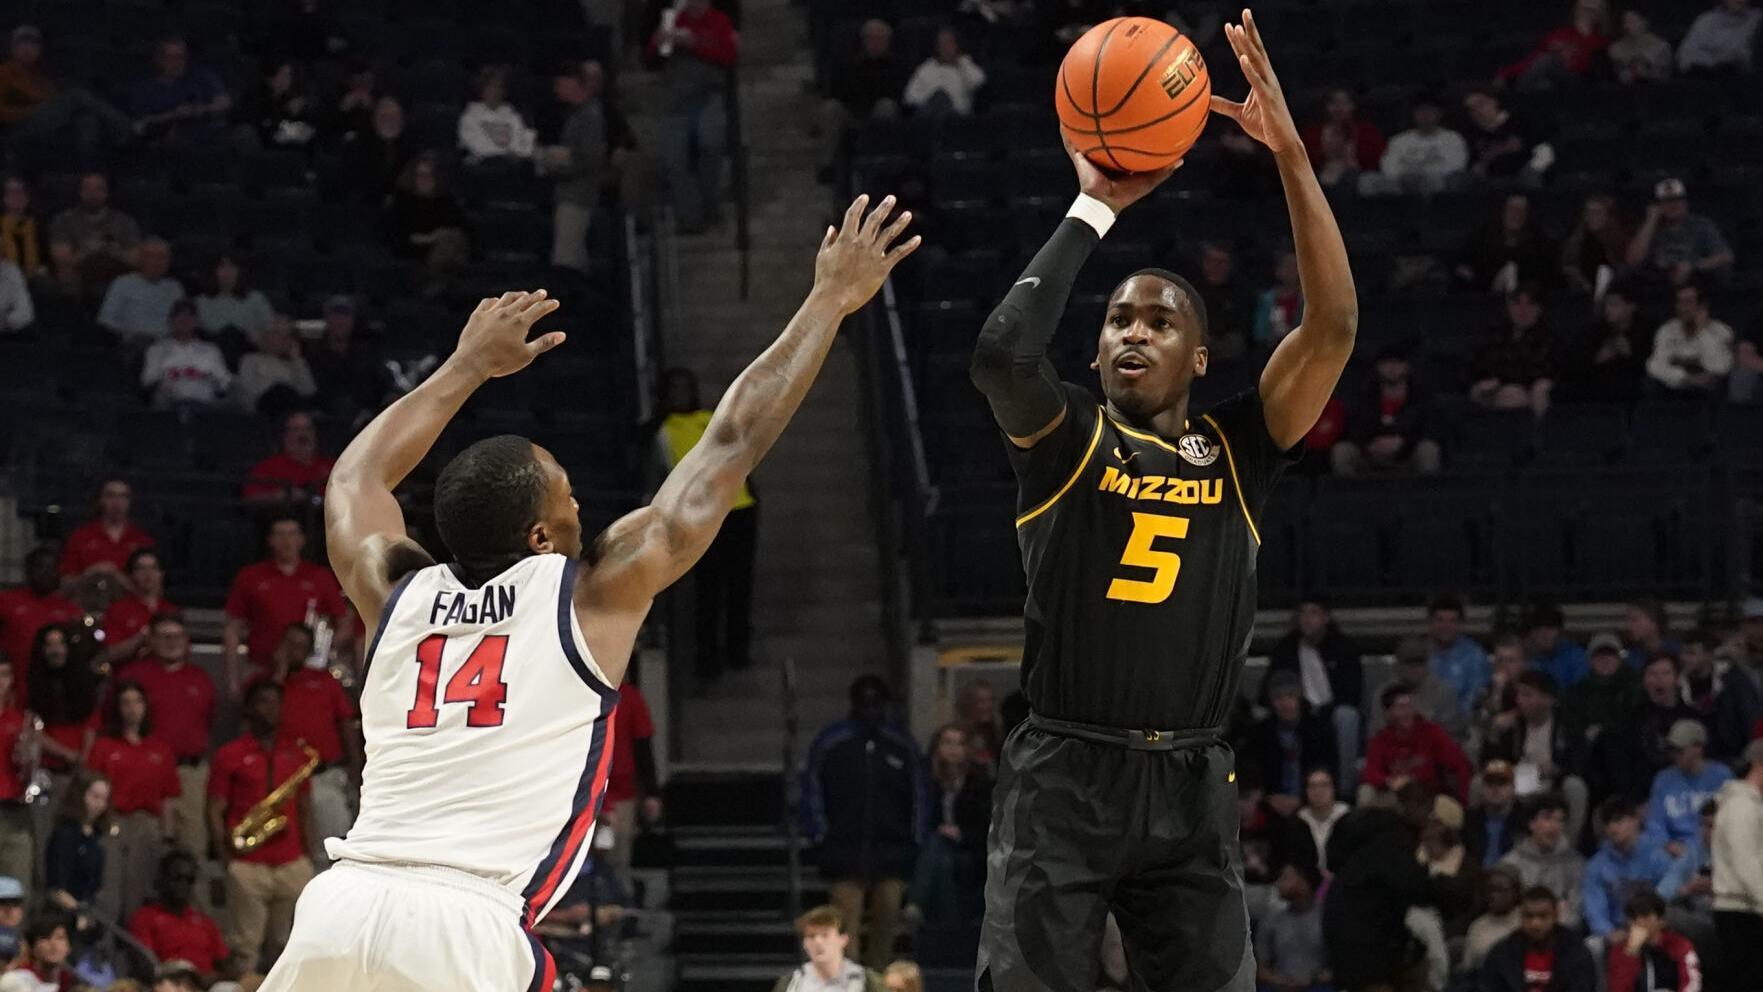 Mizzou basketball rediscovers shooting touch at Ole Miss for first SEC road win